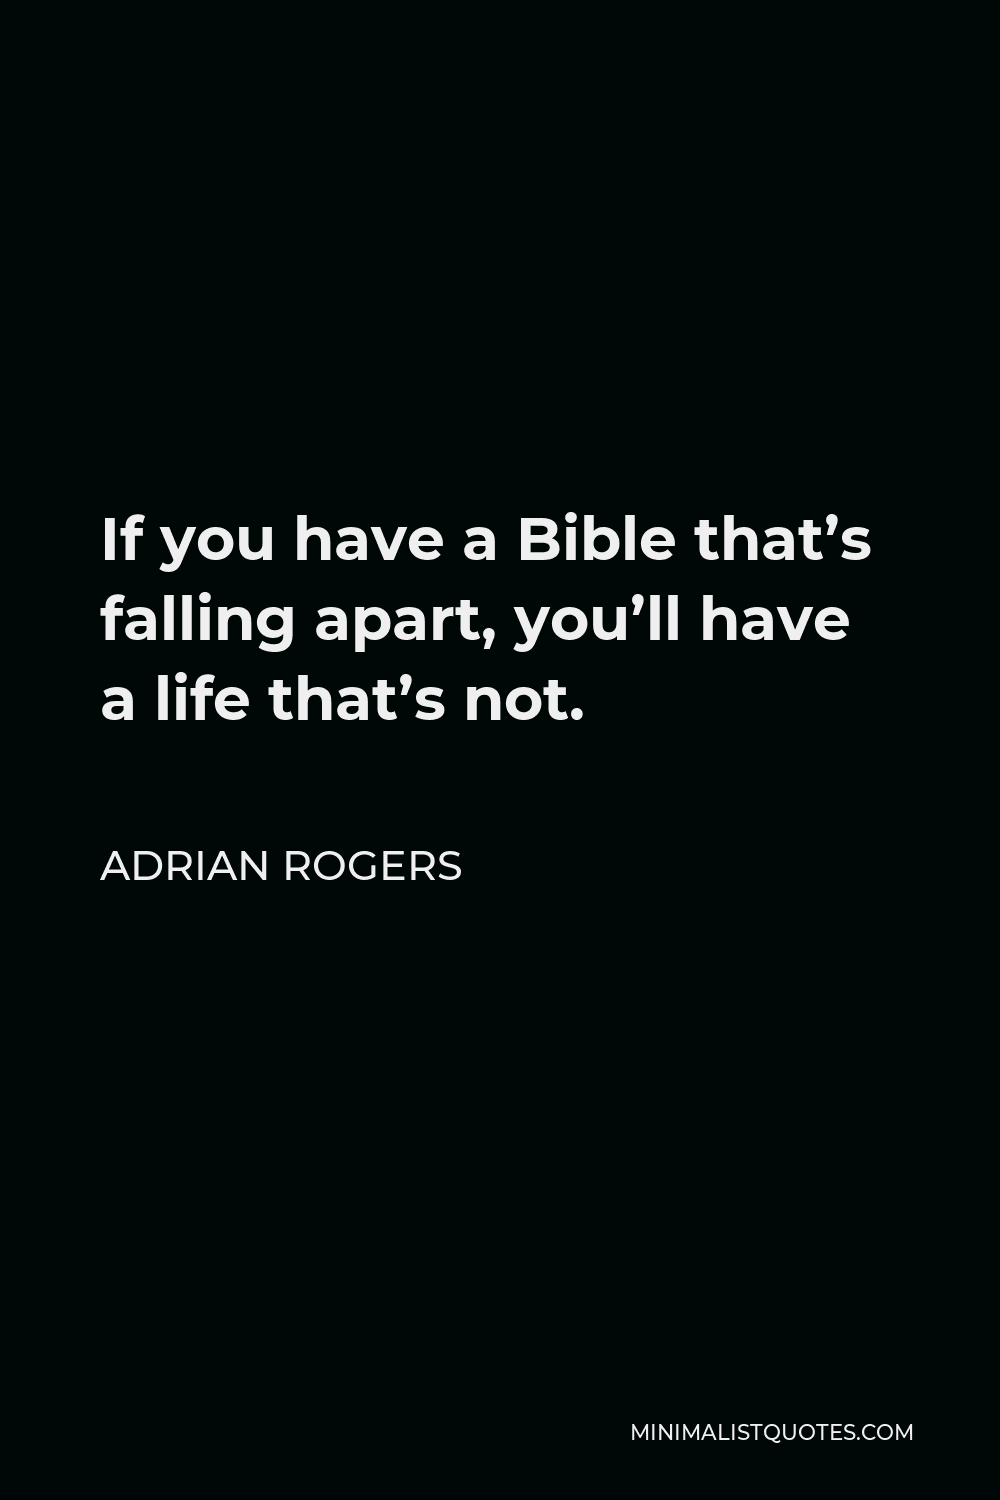 Adrian Rogers Quote - If you have a Bible that’s falling apart, you’ll have a life that’s not.